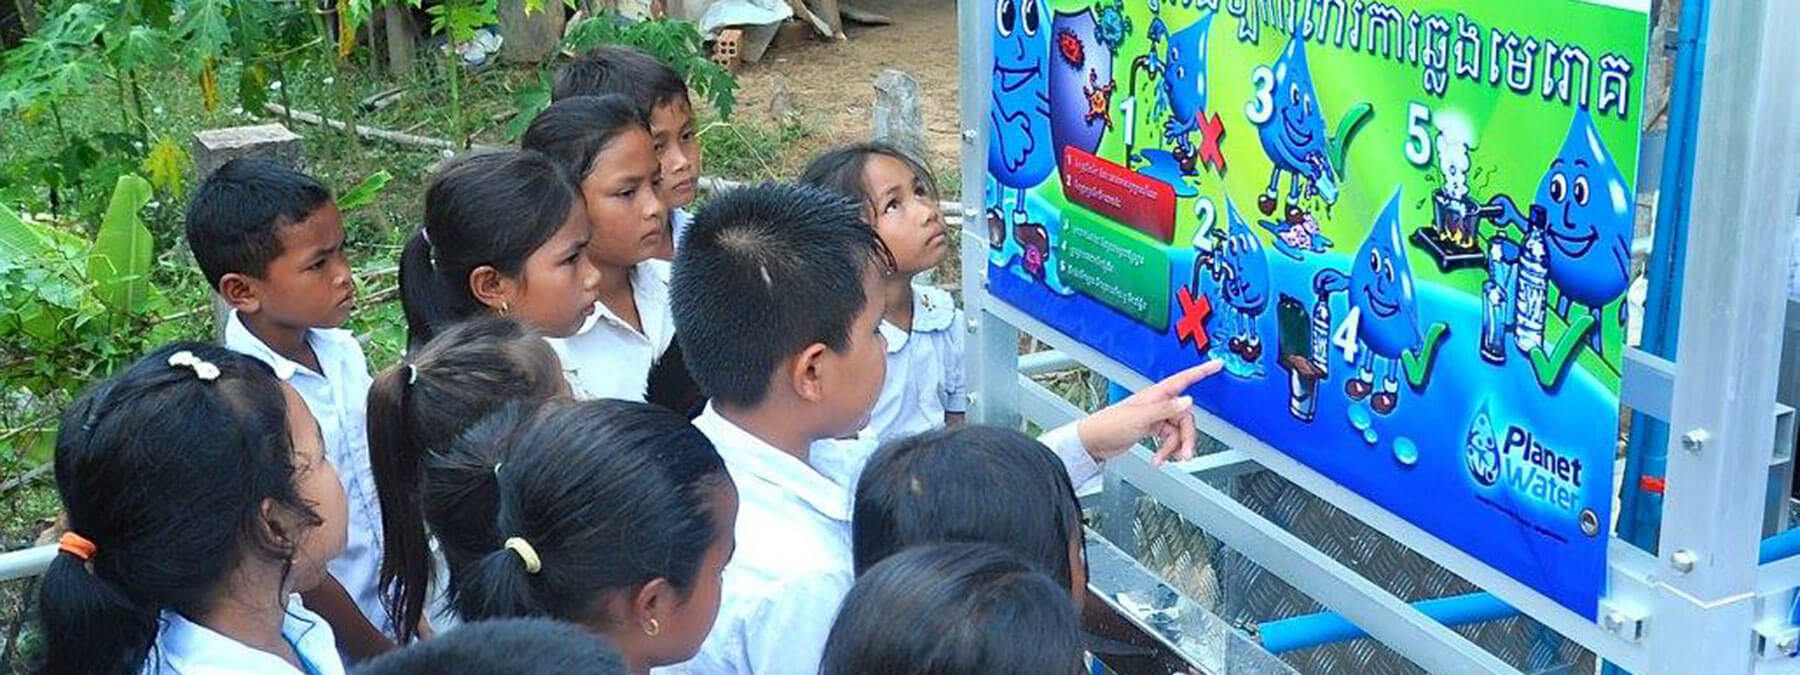 A group of children looking at a large screen.